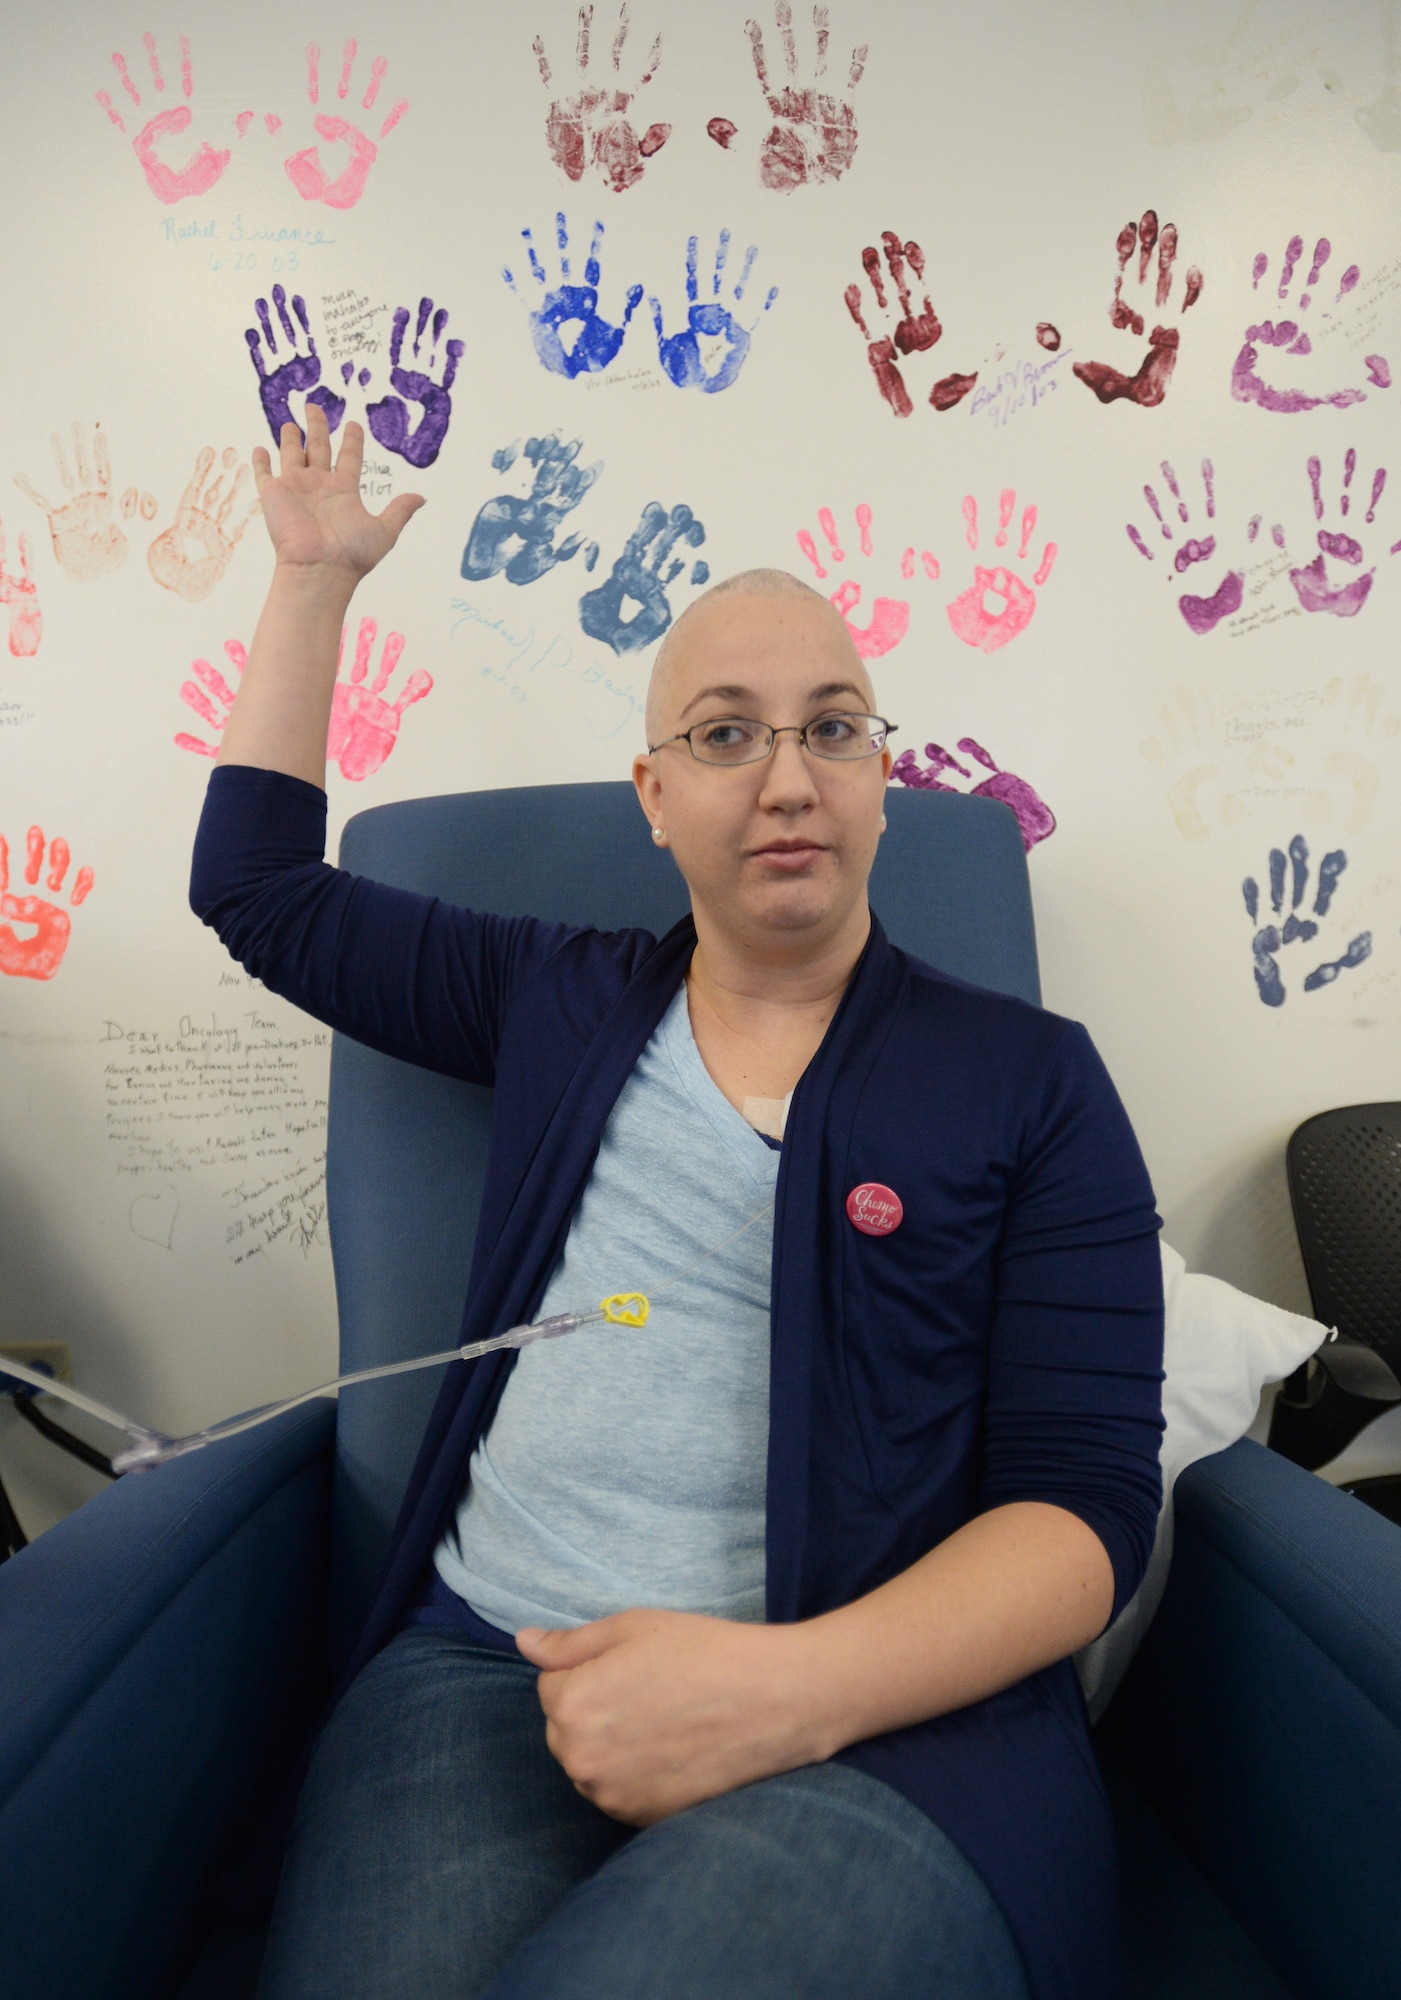 Staff Sgt. Amanda Dick, 15th Medical Support Squadron patient flight, poses in front of a wall of painted hands during her chemotherapy treatment at Tripler Army Medical Center, Honolulu, Hawaii, Feb. 26, 2014. The hands are of cancer patients that were treated at the medical center. Since being diagnosed with breast cancer in October 2013, Dick has finished one-of-two rounds of chemotherapy, and is expected to be done with treatment in April. (U.S. Air Force photo/Staff Sgt. Alexander Martinez)